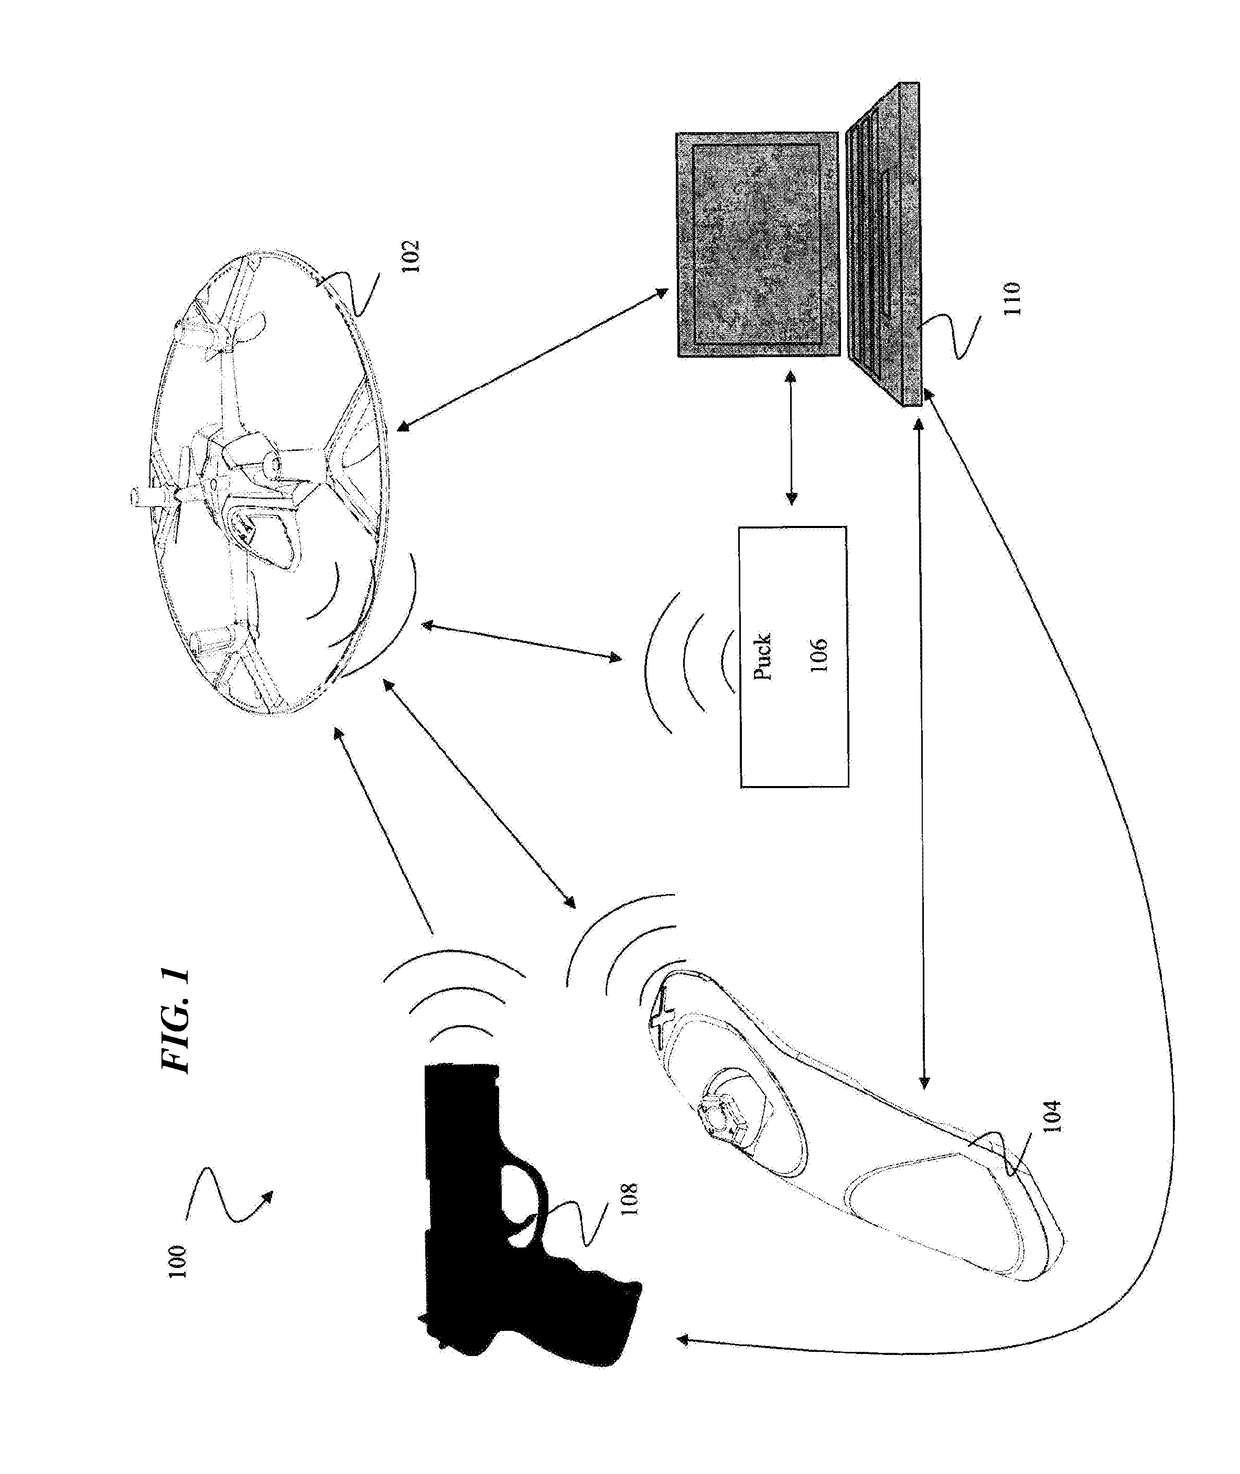 System for game play with multiple remote-control flying craft with wireless communication